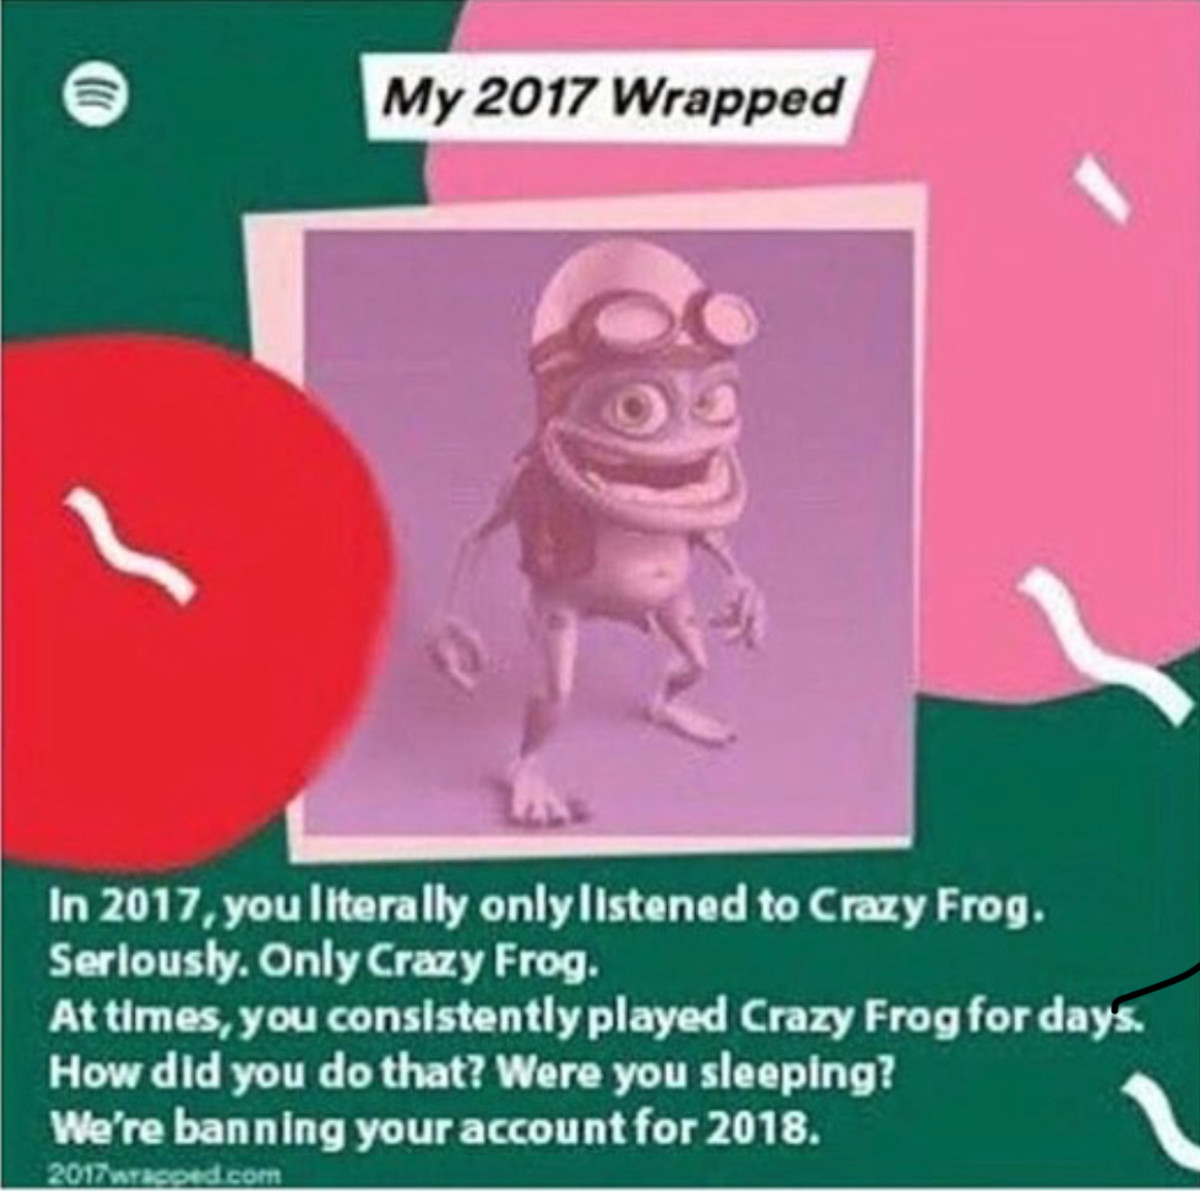 Post your Spotify Wrapped 2017 playlists no balls. 🤷♂. In 2017, you literally to Crazy Frog. Sereously. Only Crazy Frog. At times, you consistently played Crazy